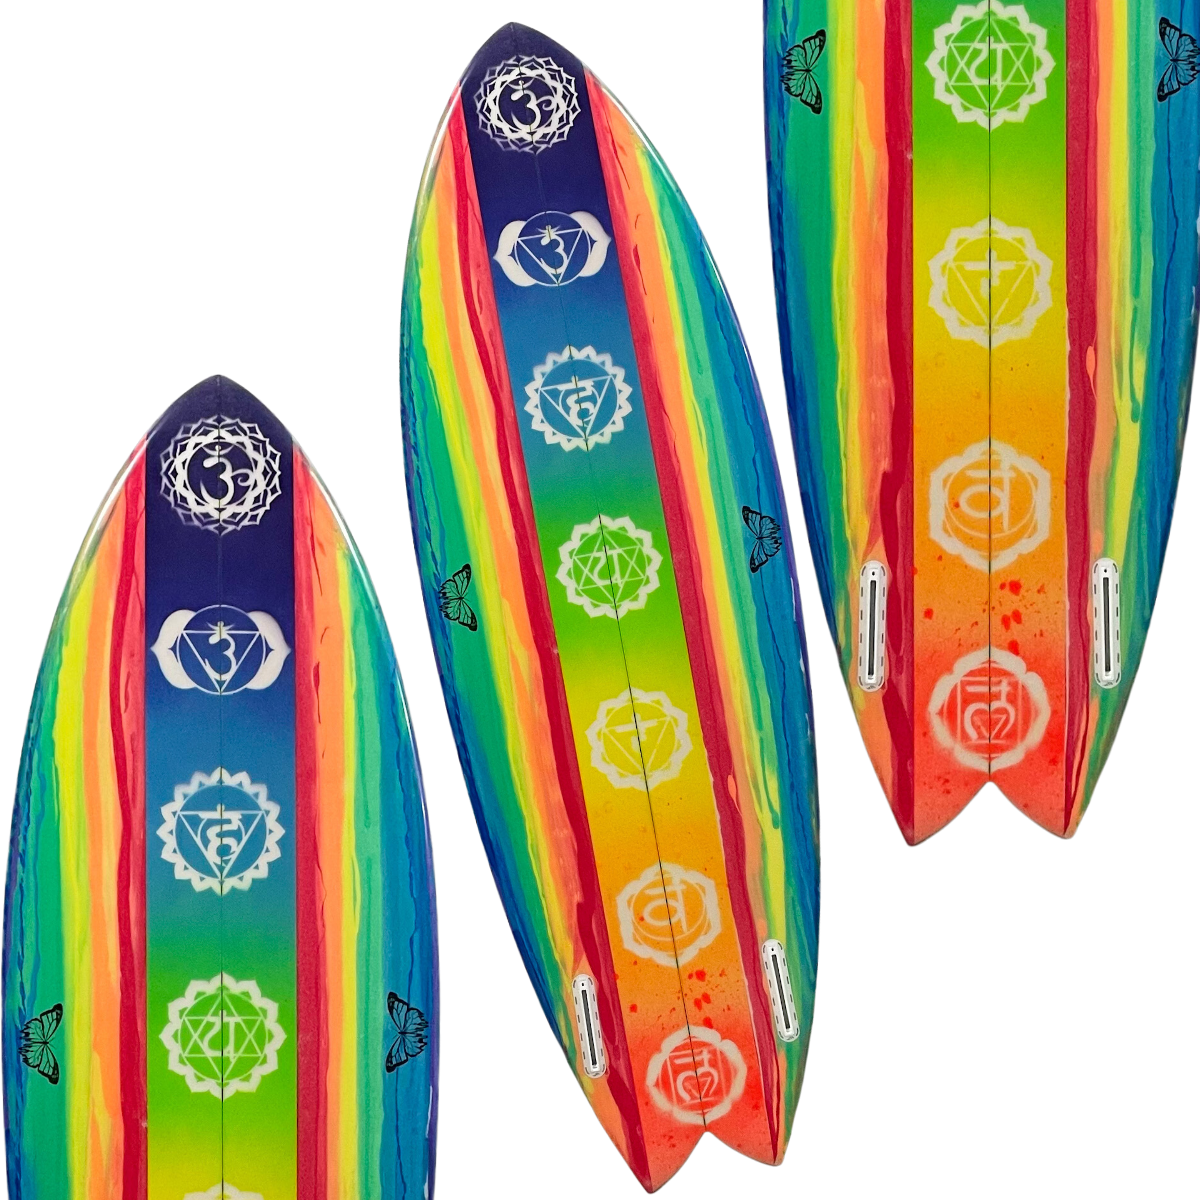 The Fish Surfboard